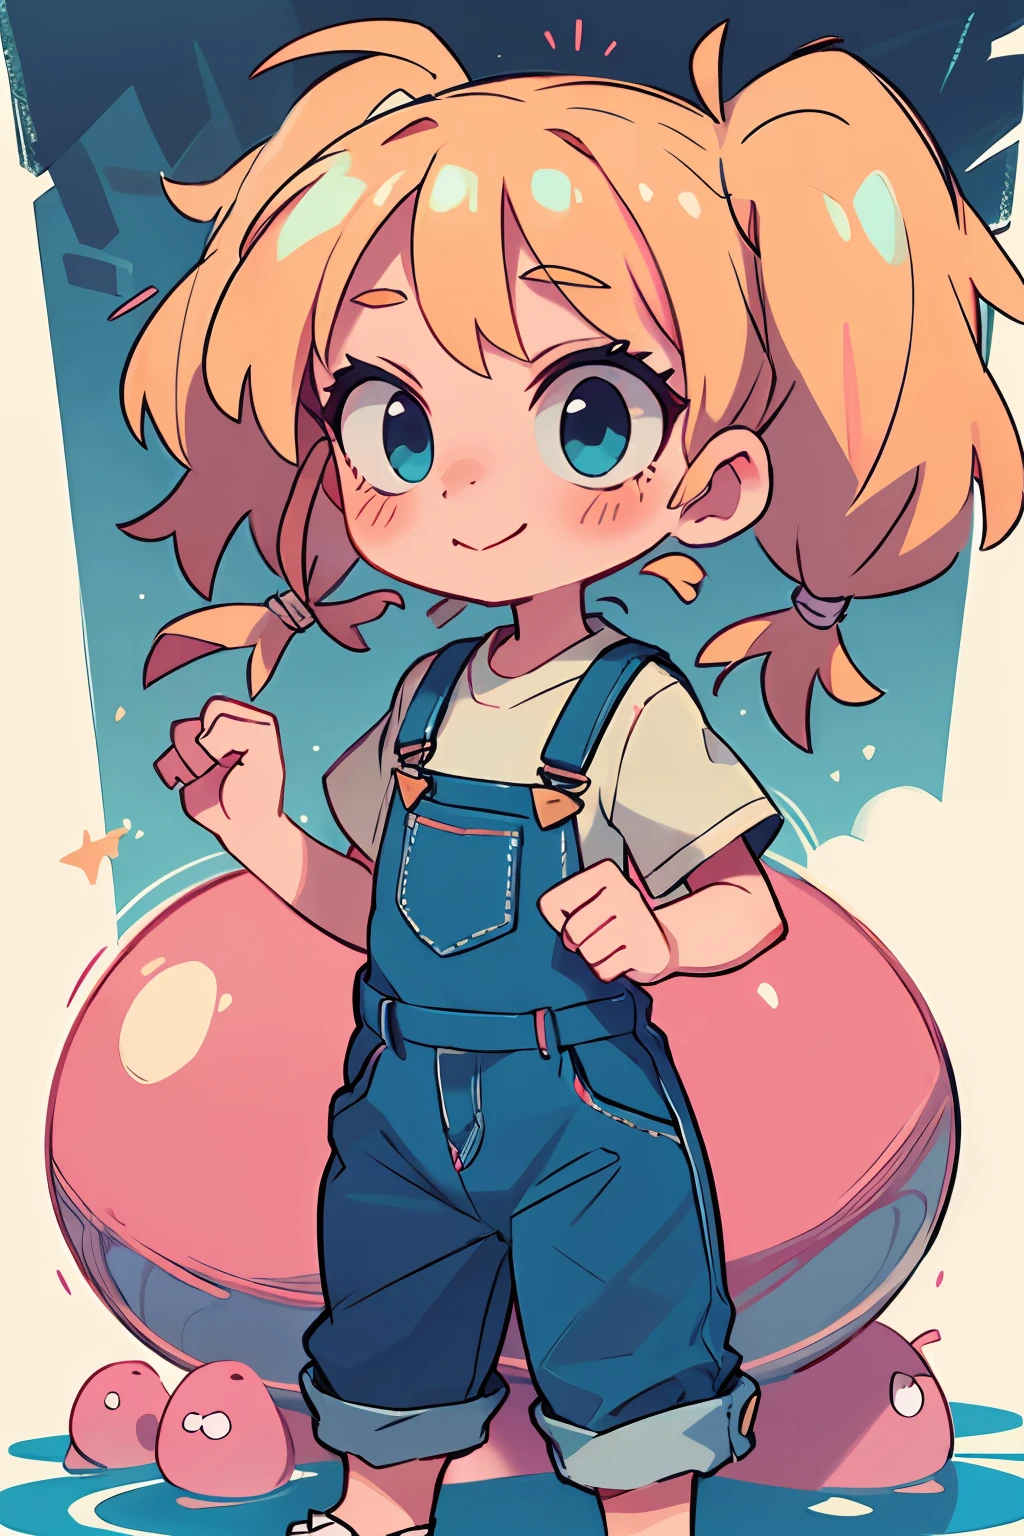 masterpiece, beautiful, 4k, detailed, intricate details, , , overalls, jean overalls, cuffed overalls, blonde hair, long blonde pigtails, hair ballies, pink hair tie balls, long flowing pigtails, soft blue eyes, soft smile, slight smile, hands back, standing on the balls of her feet, 1girl, rocking, shirtless, overalls over skin